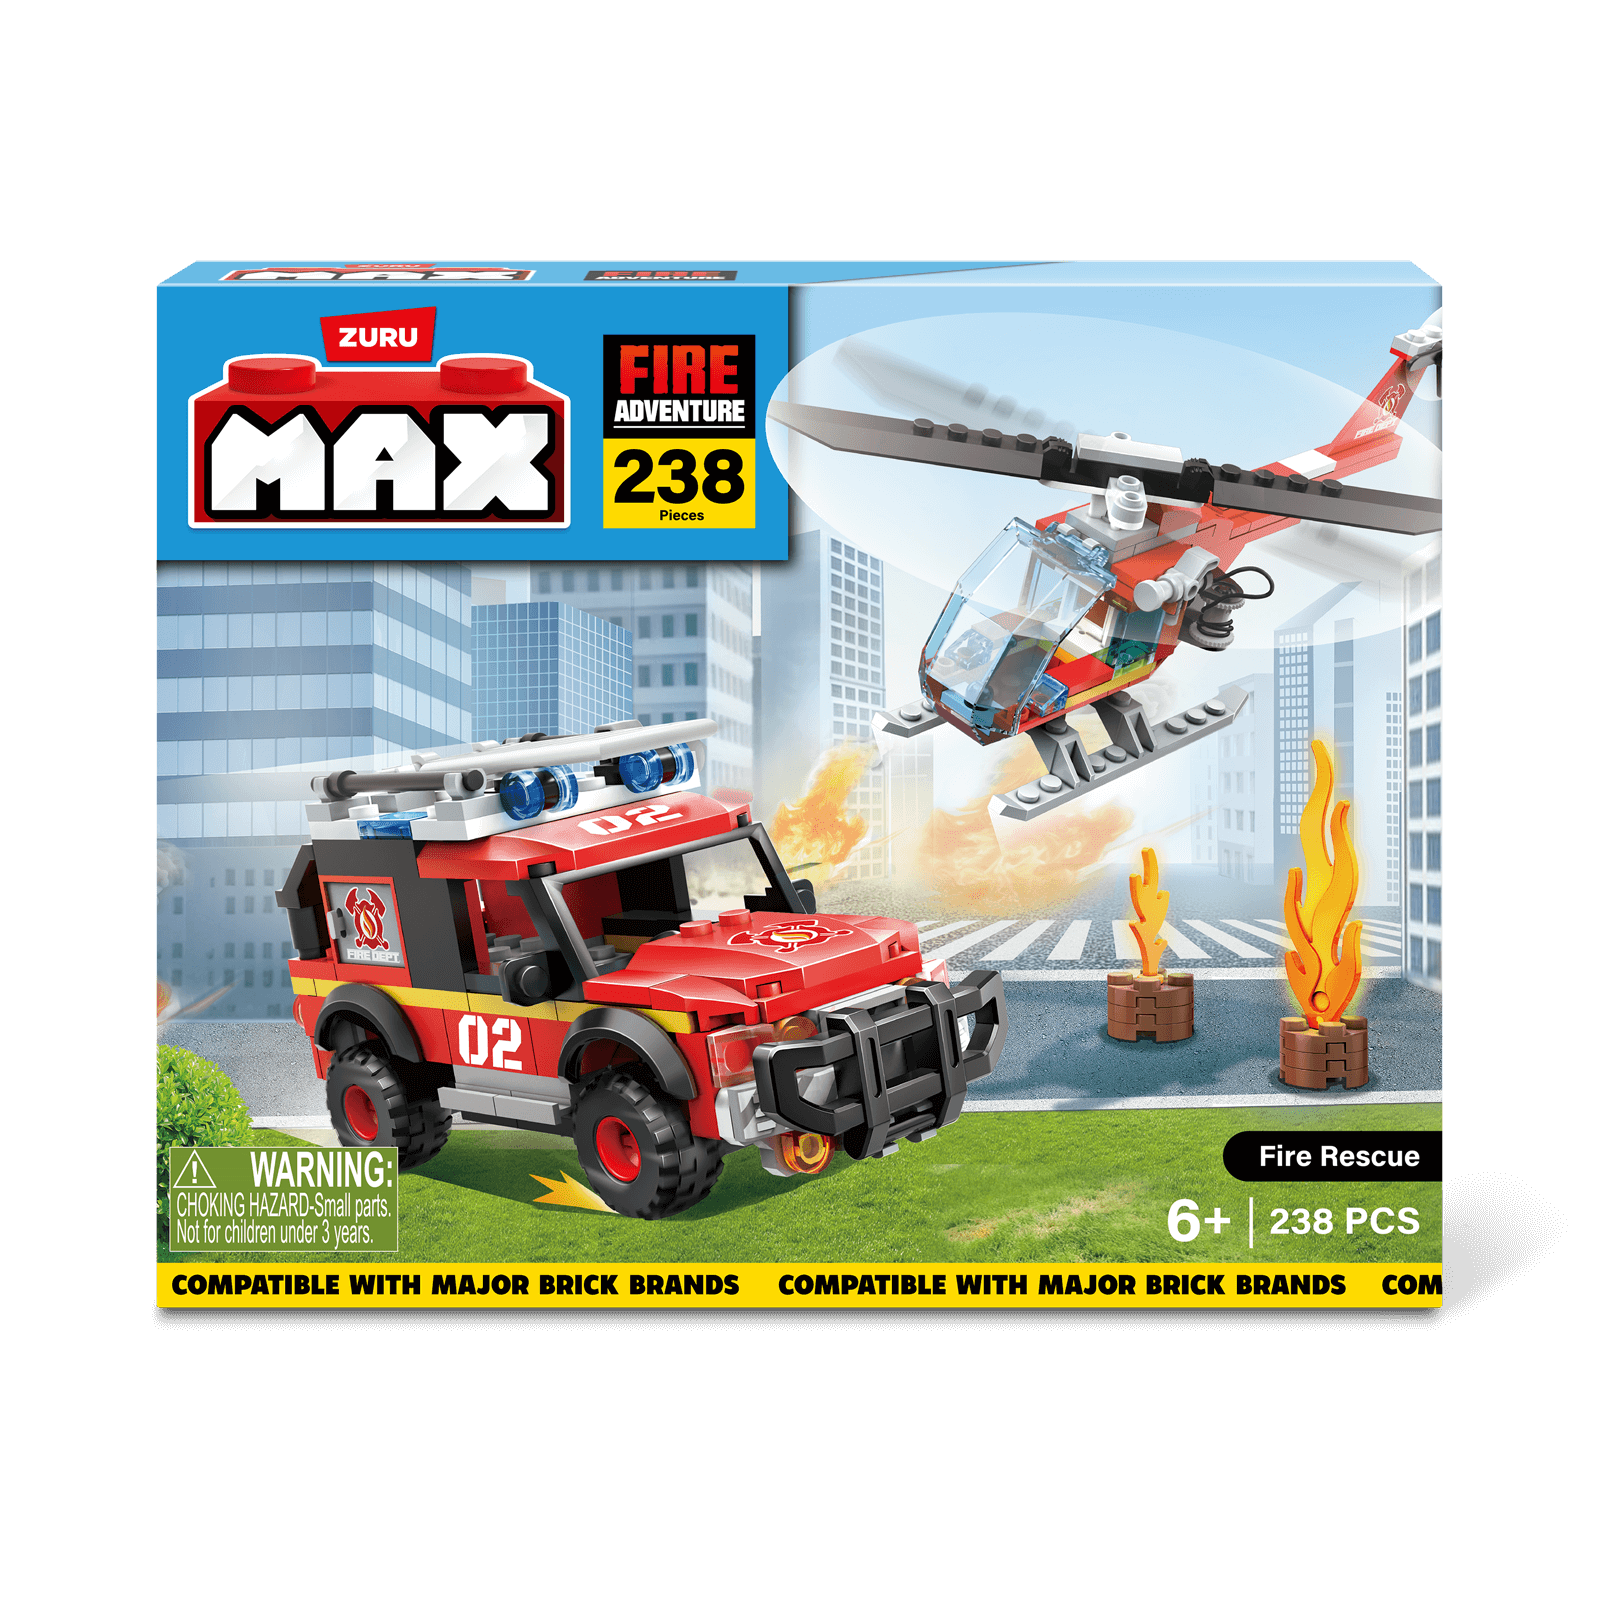 MAX Adventure Fire Rescue Playset (238 pieces)